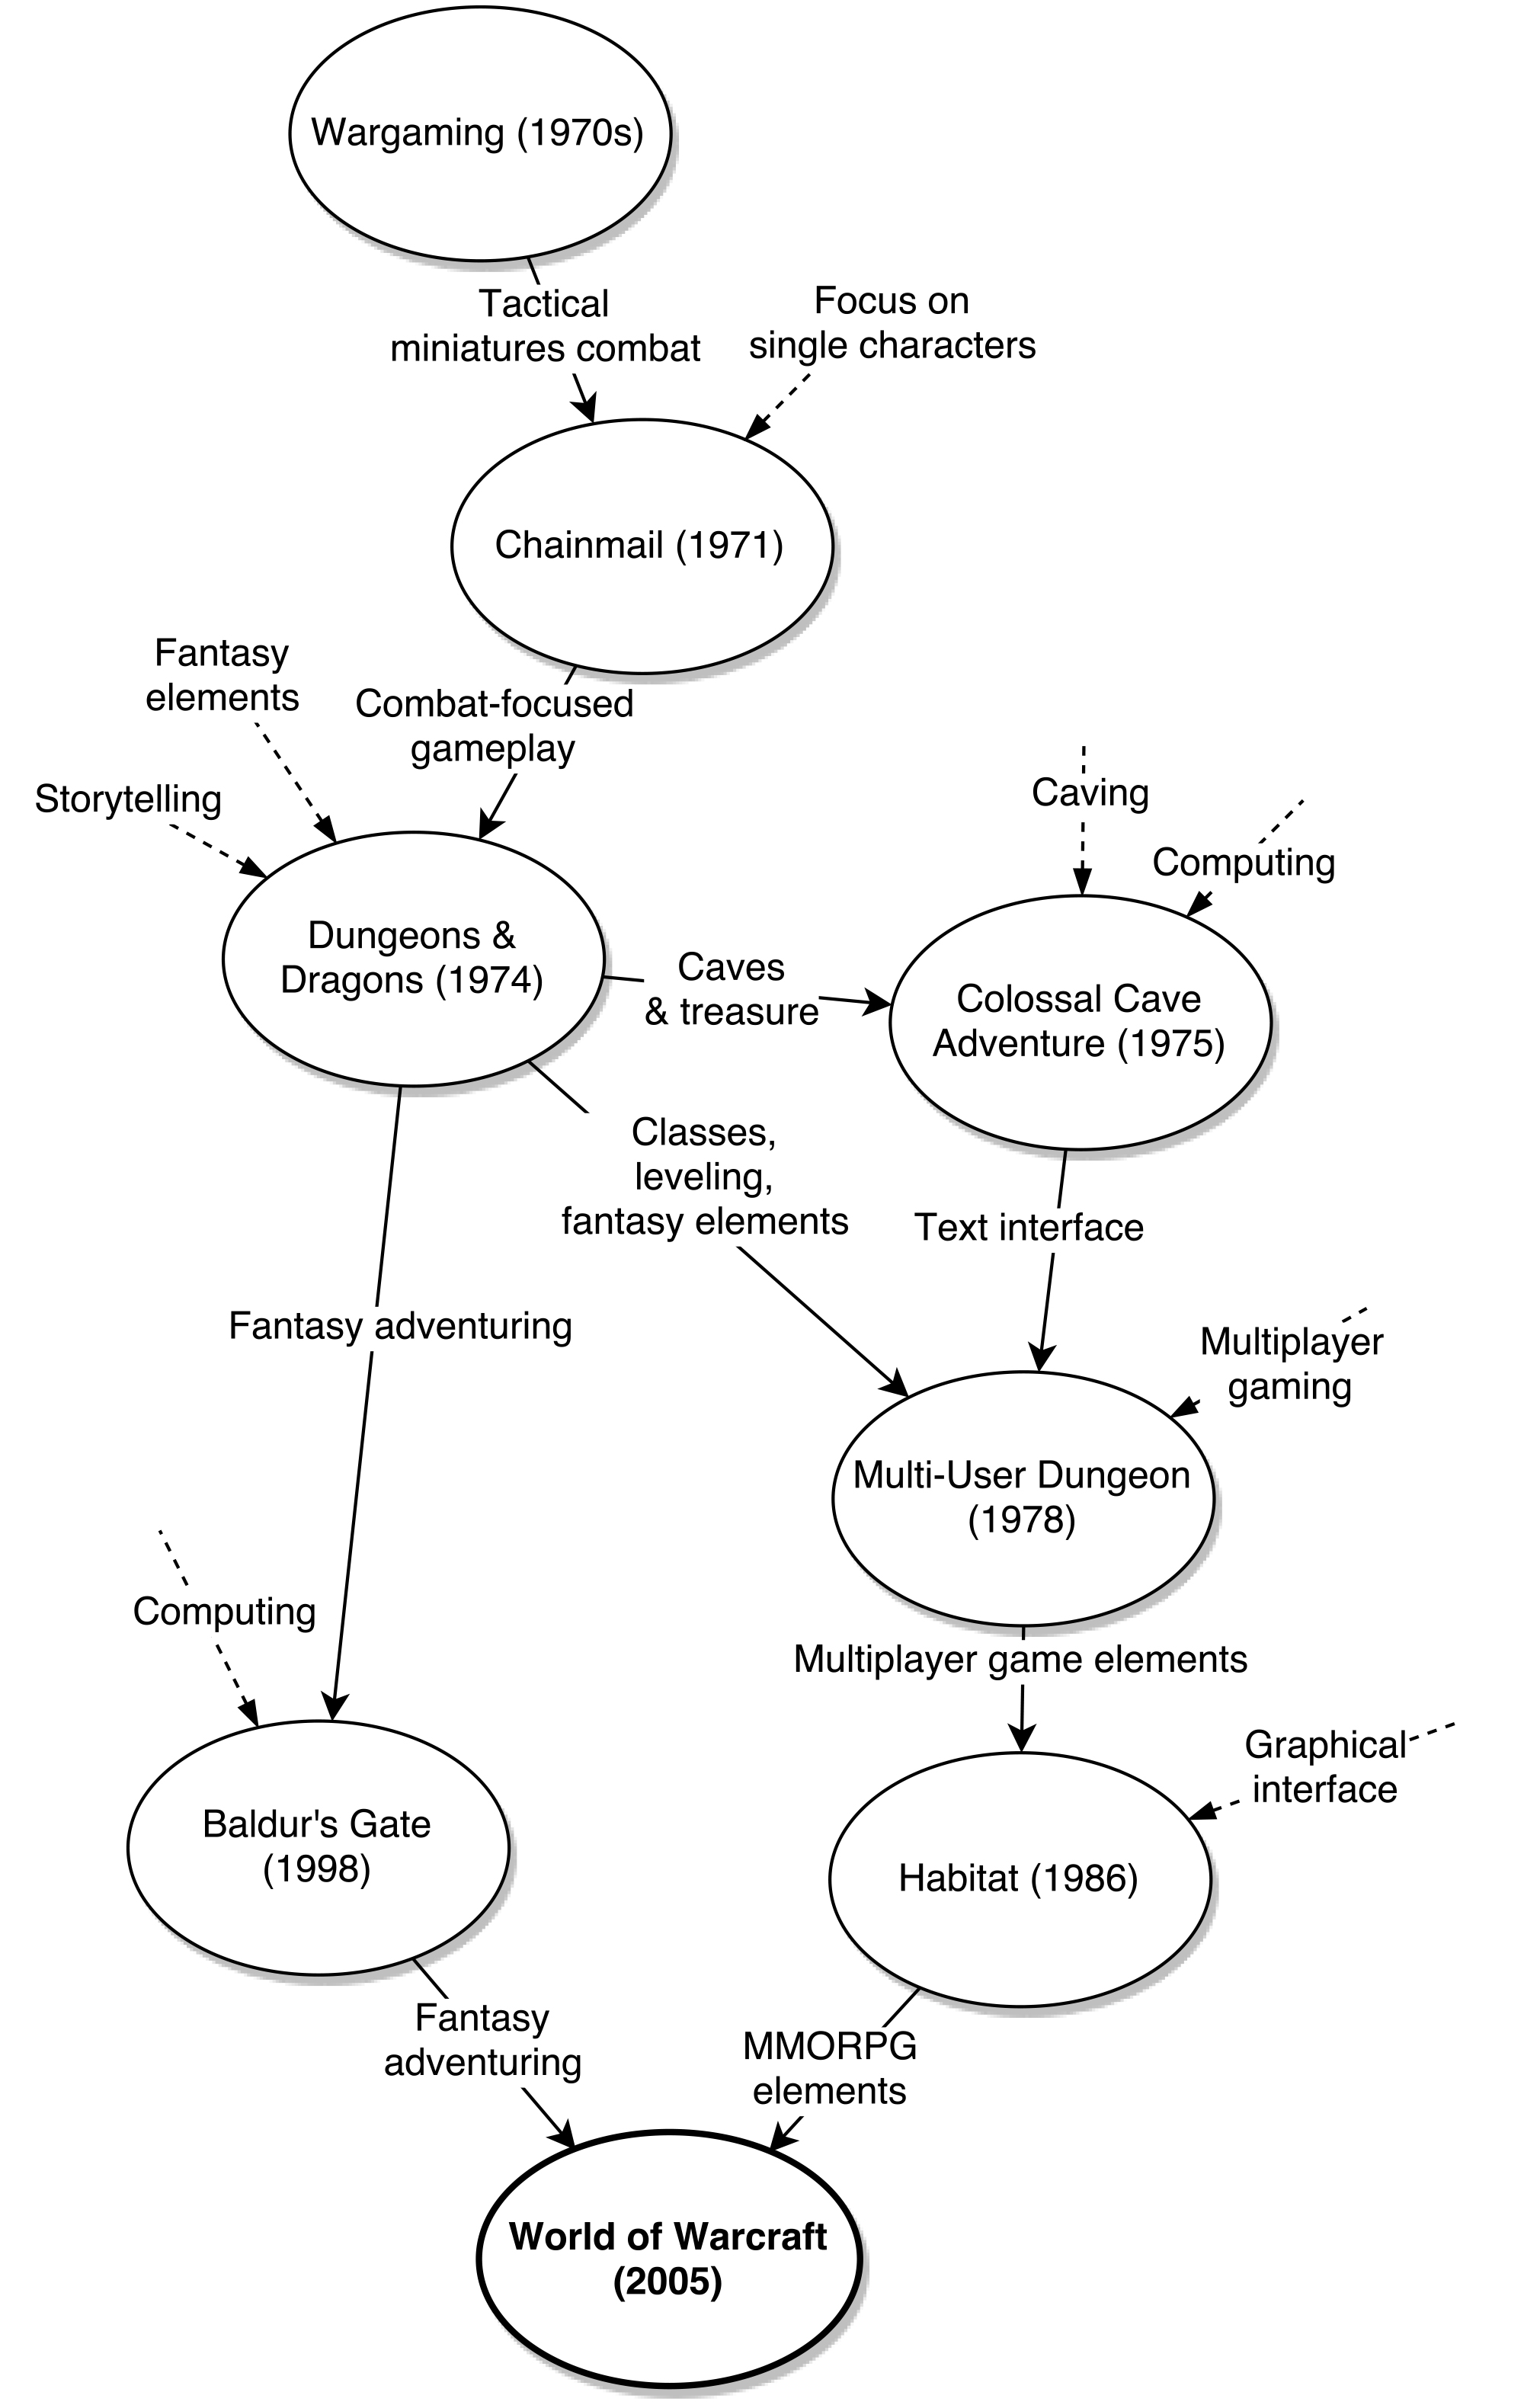 A simplified family tree from wargaming to World of Warcraft